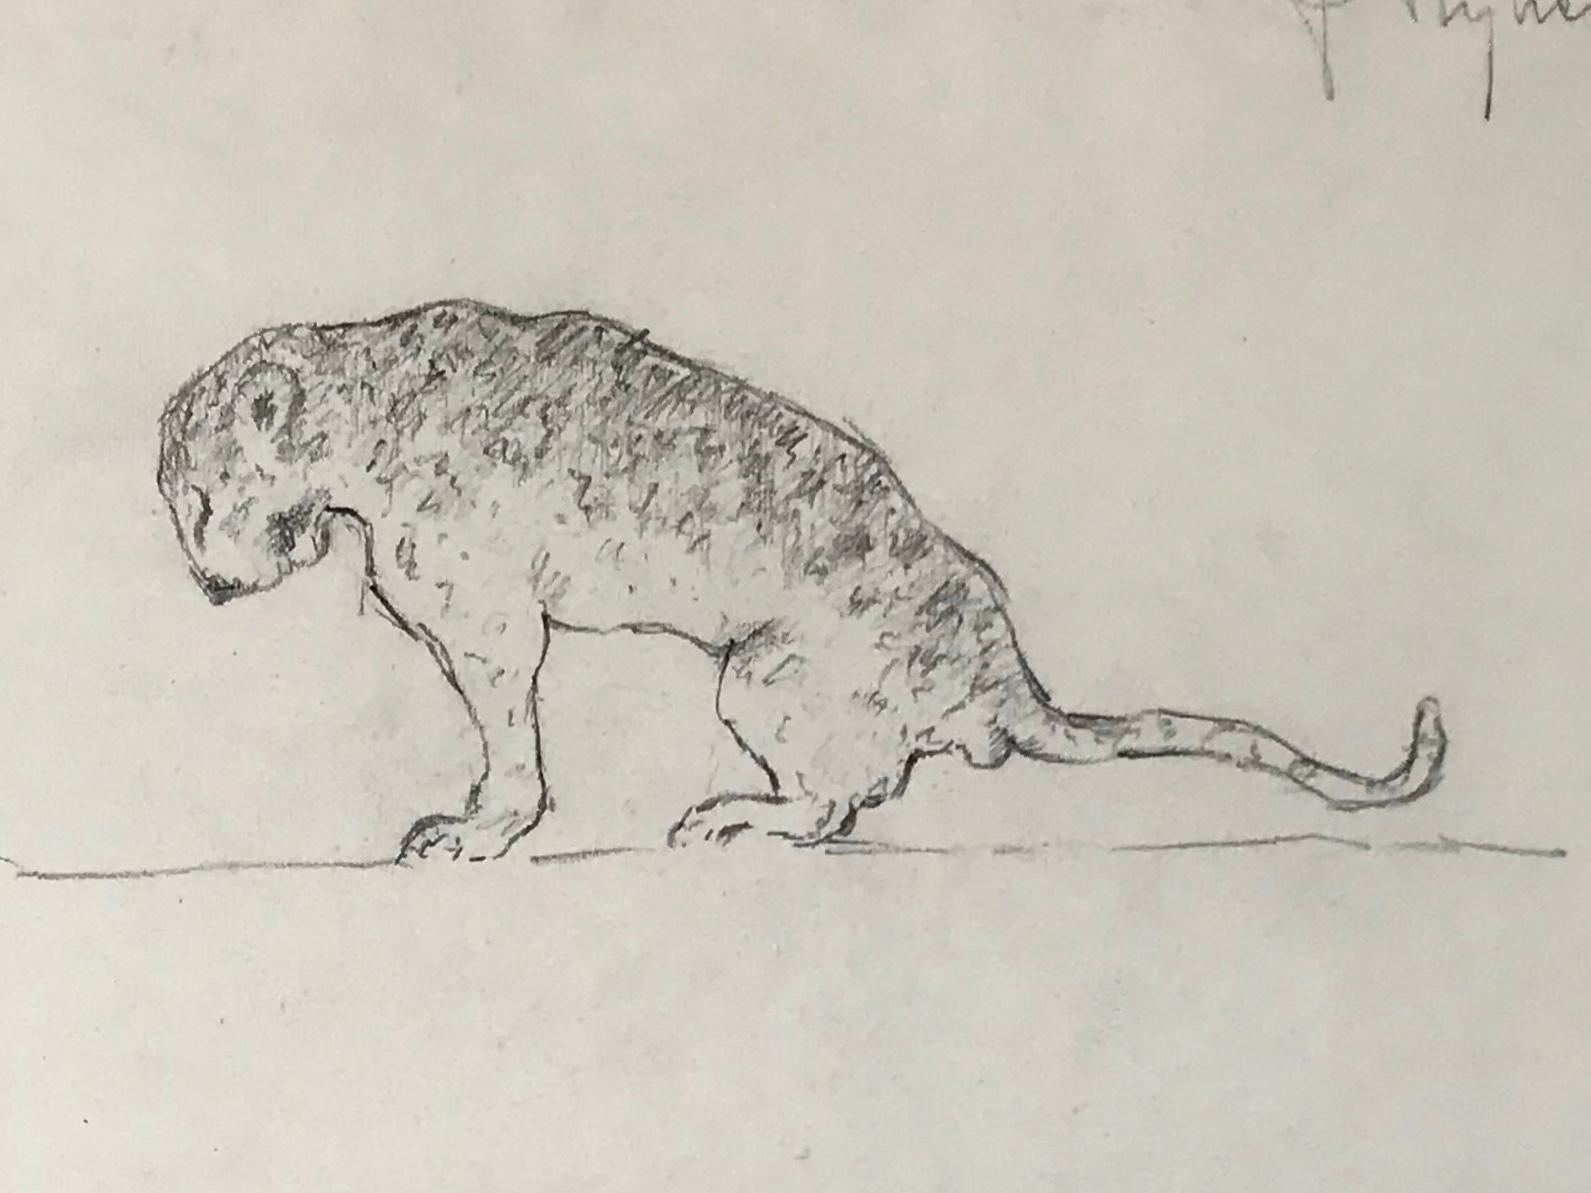 Leopard drawing, Guido Righetti, 1919. Original vintage Italian pencil drawings/sketches of a leopard in various poses from a series undertaken by Righetti for his sculptures in bronze including a boar, an elephant, a black cassoary, a white